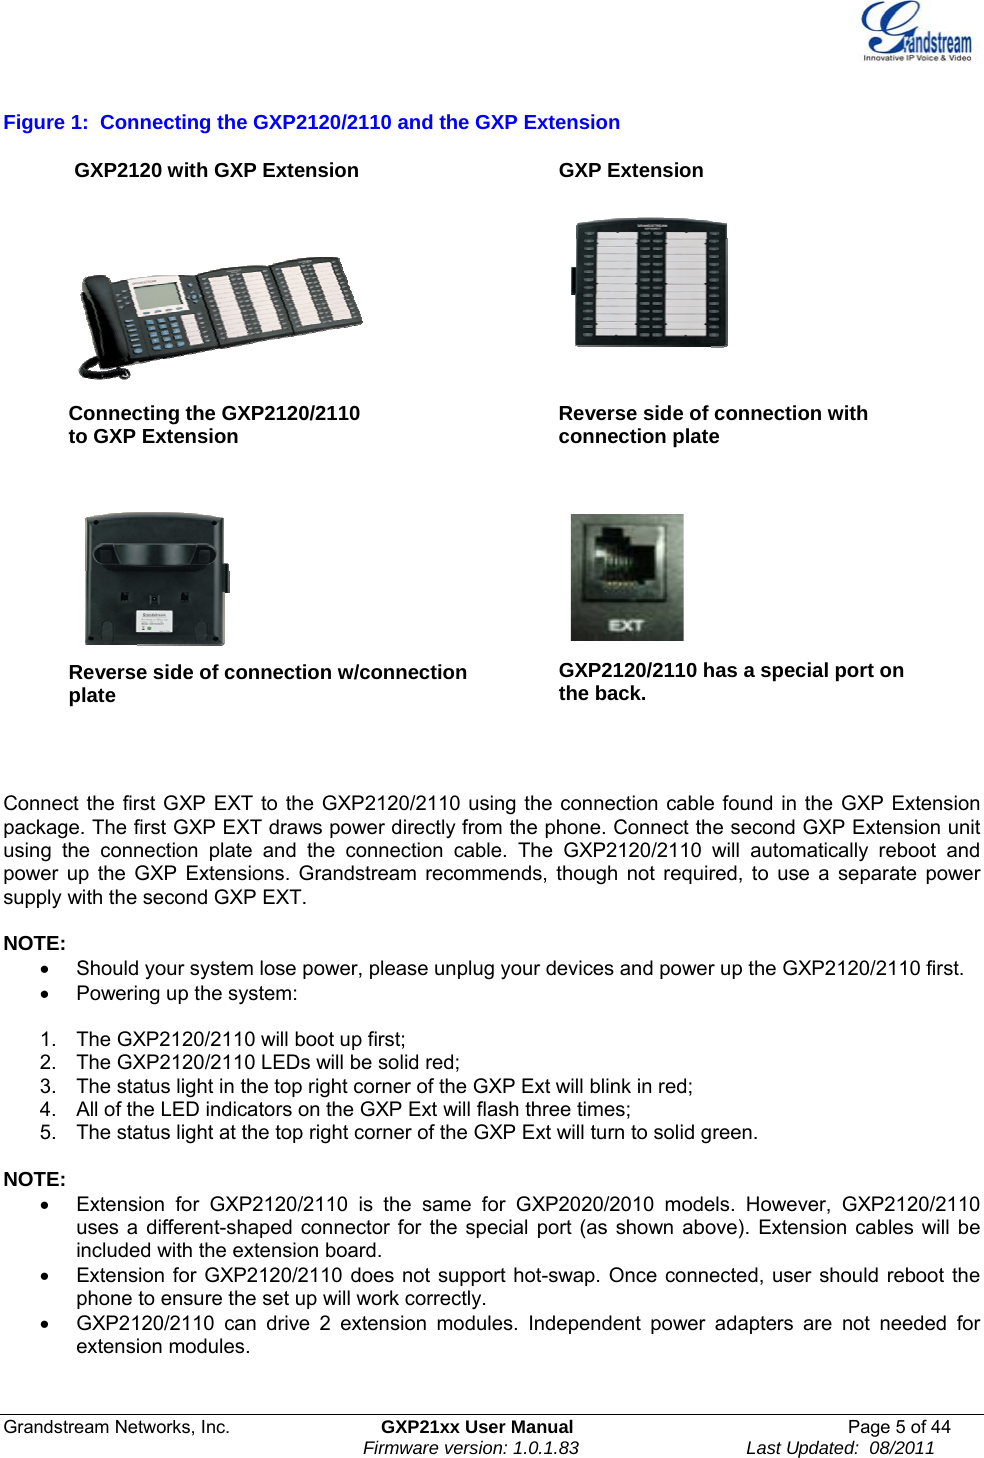  Grandstream Networks, Inc.  GXP21xx User Manual  Page 5 of 44                                                                Firmware version: 1.0.1.83                                 Last Updated:  08/2011  Figure 1:  Connecting the GXP2120/2110 and the GXP Extension  GXP2120 with GXP Extension  GXP Extension   Connecting the GXP2120/2110  to GXP Extension  Reverse side of connection with connection plate   Reverse side of connection w/connection plate        GXP2120/2110 has a special port on the back.        Connect the first GXP EXT to the GXP2120/2110 using the connection cable found in the GXP Extension package. The first GXP EXT draws power directly from the phone. Connect the second GXP Extension unit using the connection plate and the connection cable. The GXP2120/2110 will automatically reboot and power up the GXP Extensions. Grandstream recommends, though not required, to use a separate power supply with the second GXP EXT.     NOTE:   •  Should your system lose power, please unplug your devices and power up the GXP2120/2110 first. •  Powering up the system:   1.  The GXP2120/2110 will boot up first;   2.  The GXP2120/2110 LEDs will be solid red; 3.  The status light in the top right corner of the GXP Ext will blink in red; 4.  All of the LED indicators on the GXP Ext will flash three times; 5.  The status light at the top right corner of the GXP Ext will turn to solid green.   NOTE:  •  Extension for GXP2120/2110 is the same for GXP2020/2010 models. However, GXP2120/2110 uses a different-shaped connector for the special port (as shown above). Extension cables will be included with the extension board. •  Extension for GXP2120/2110 does not support hot-swap. Once connected, user should reboot the phone to ensure the set up will work correctly.  •  GXP2120/2110 can drive 2 extension modules. Independent power adapters are not needed for extension modules.   